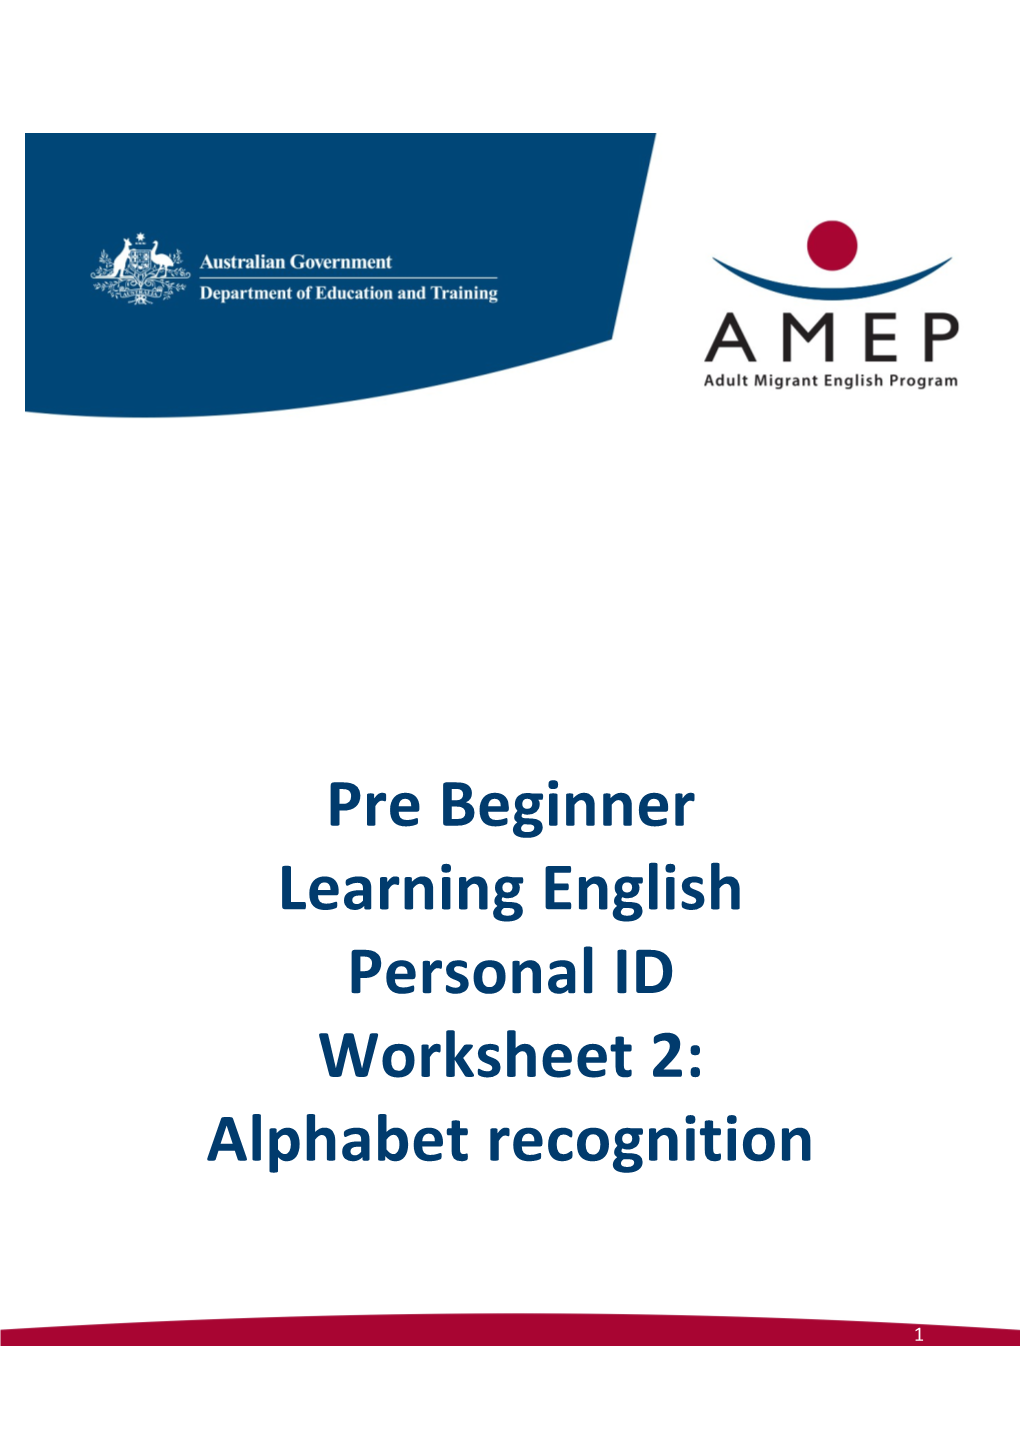 Pre Beginner Learning English Personal ID Worksheet 2: Alphabet Recognition